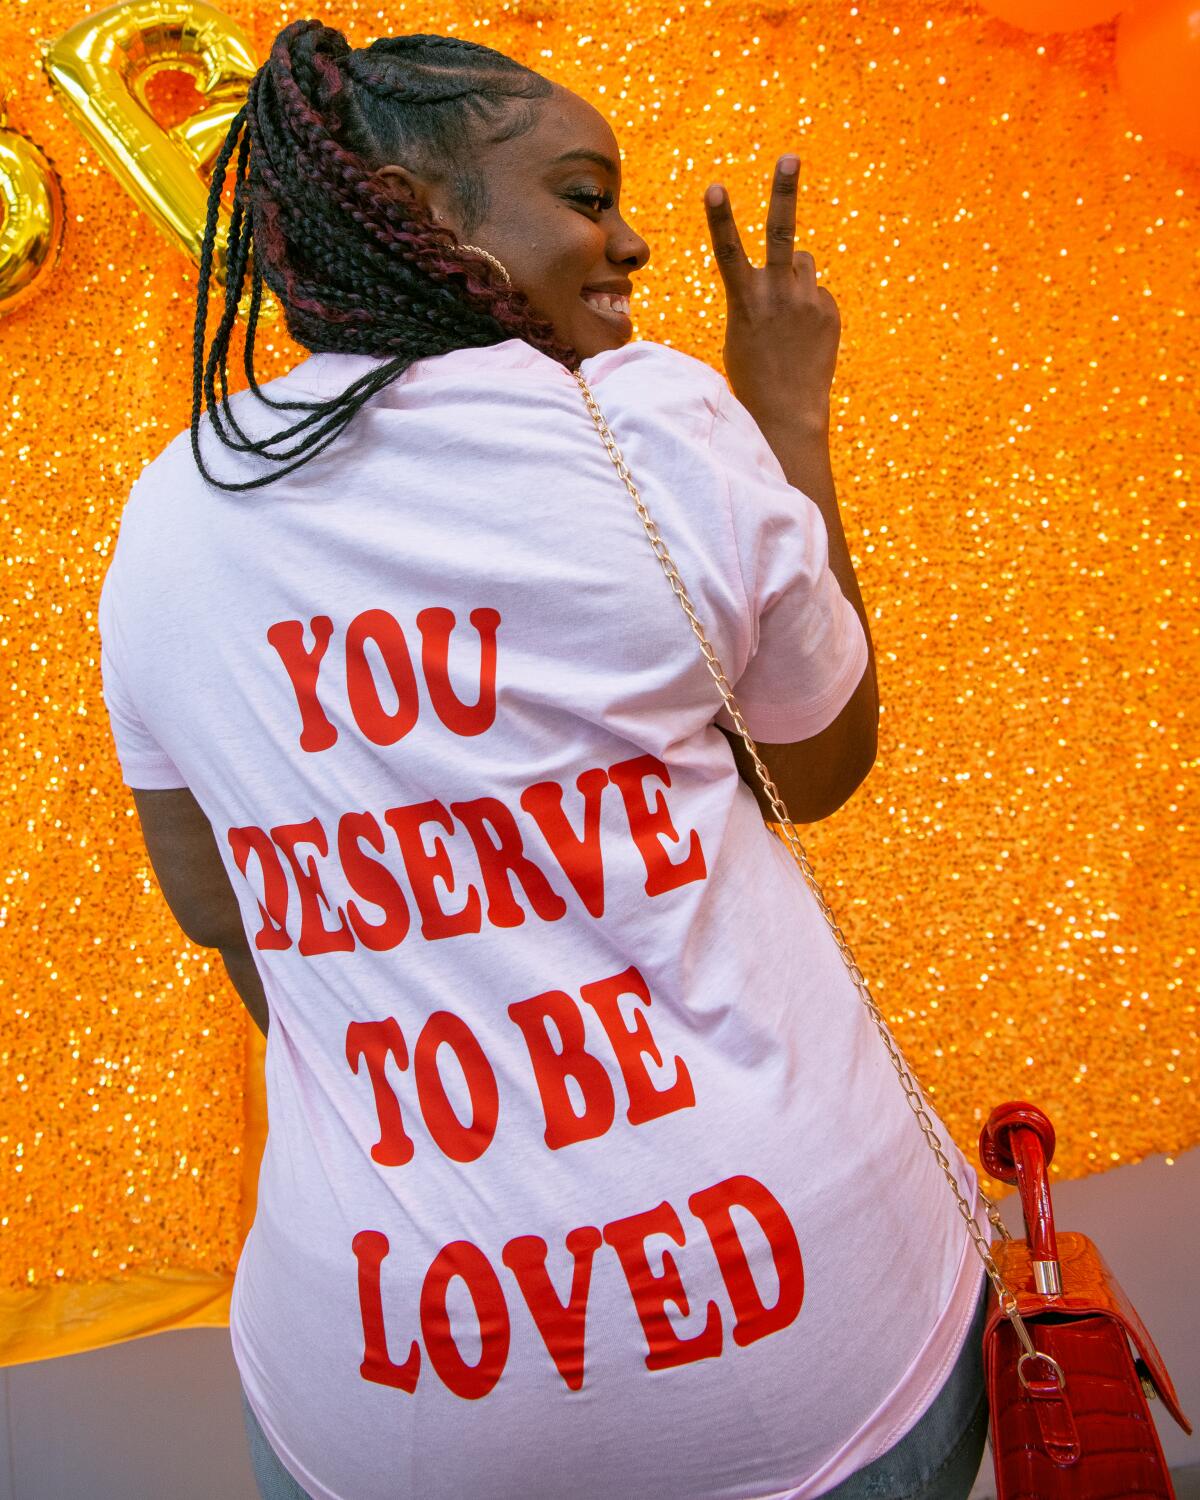 A woman with her back to the camera, revealing the message on the back of her T-shirt: "You deserve to be loved" 